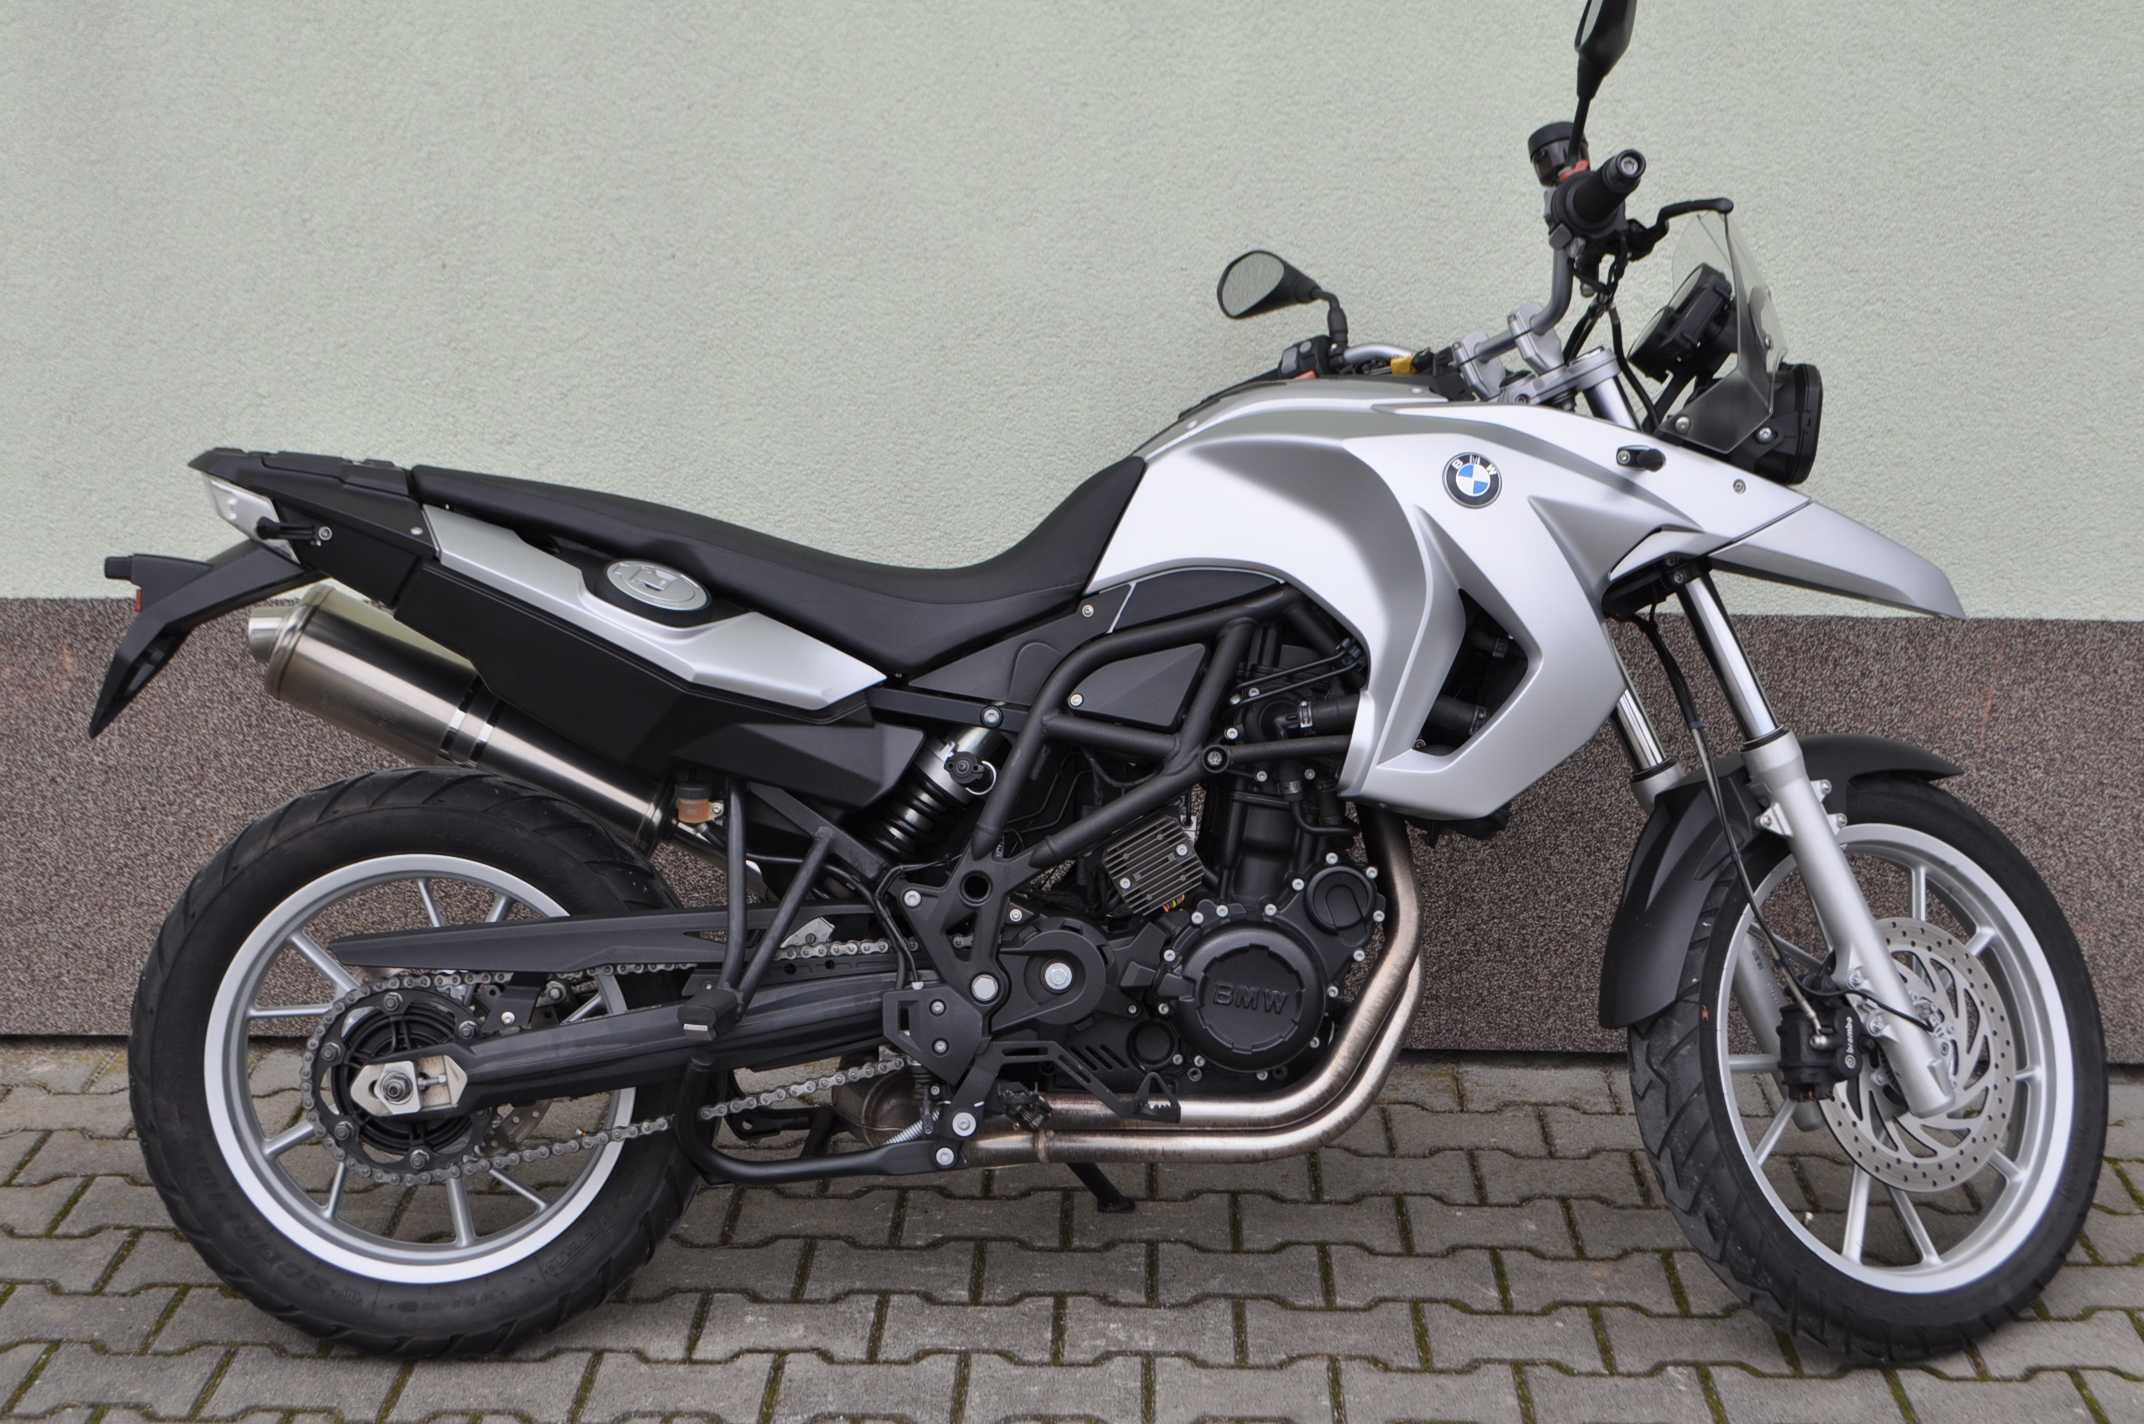 BMW F 650 GS TWIN ABS r.2010 kat. A2 25kW dl versys 800